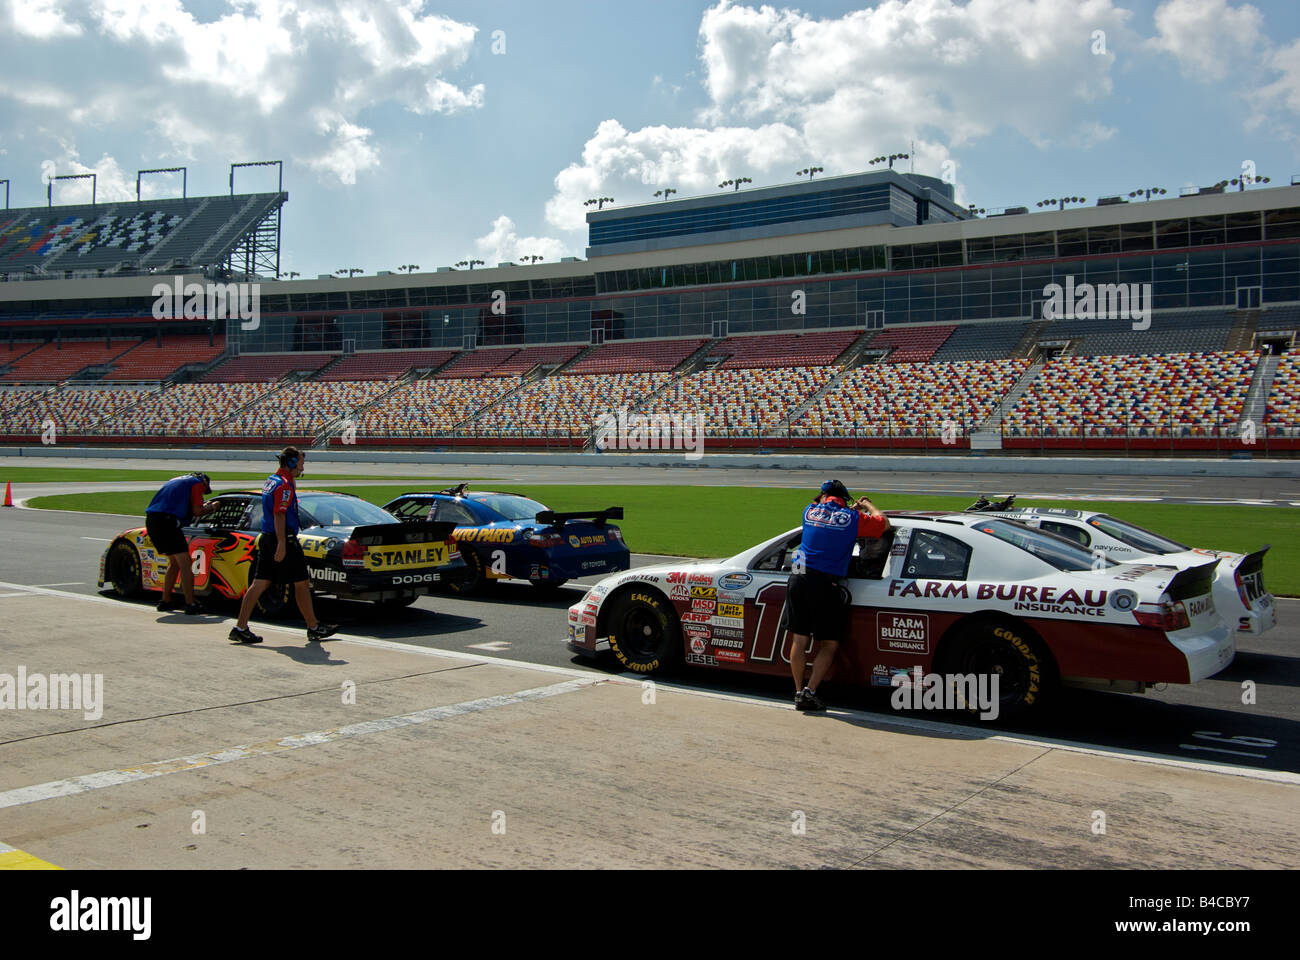 Richard Petty Driving Experience NASCAR style racecars on pit lane at Lowe's Motor Speedway Stock Photo